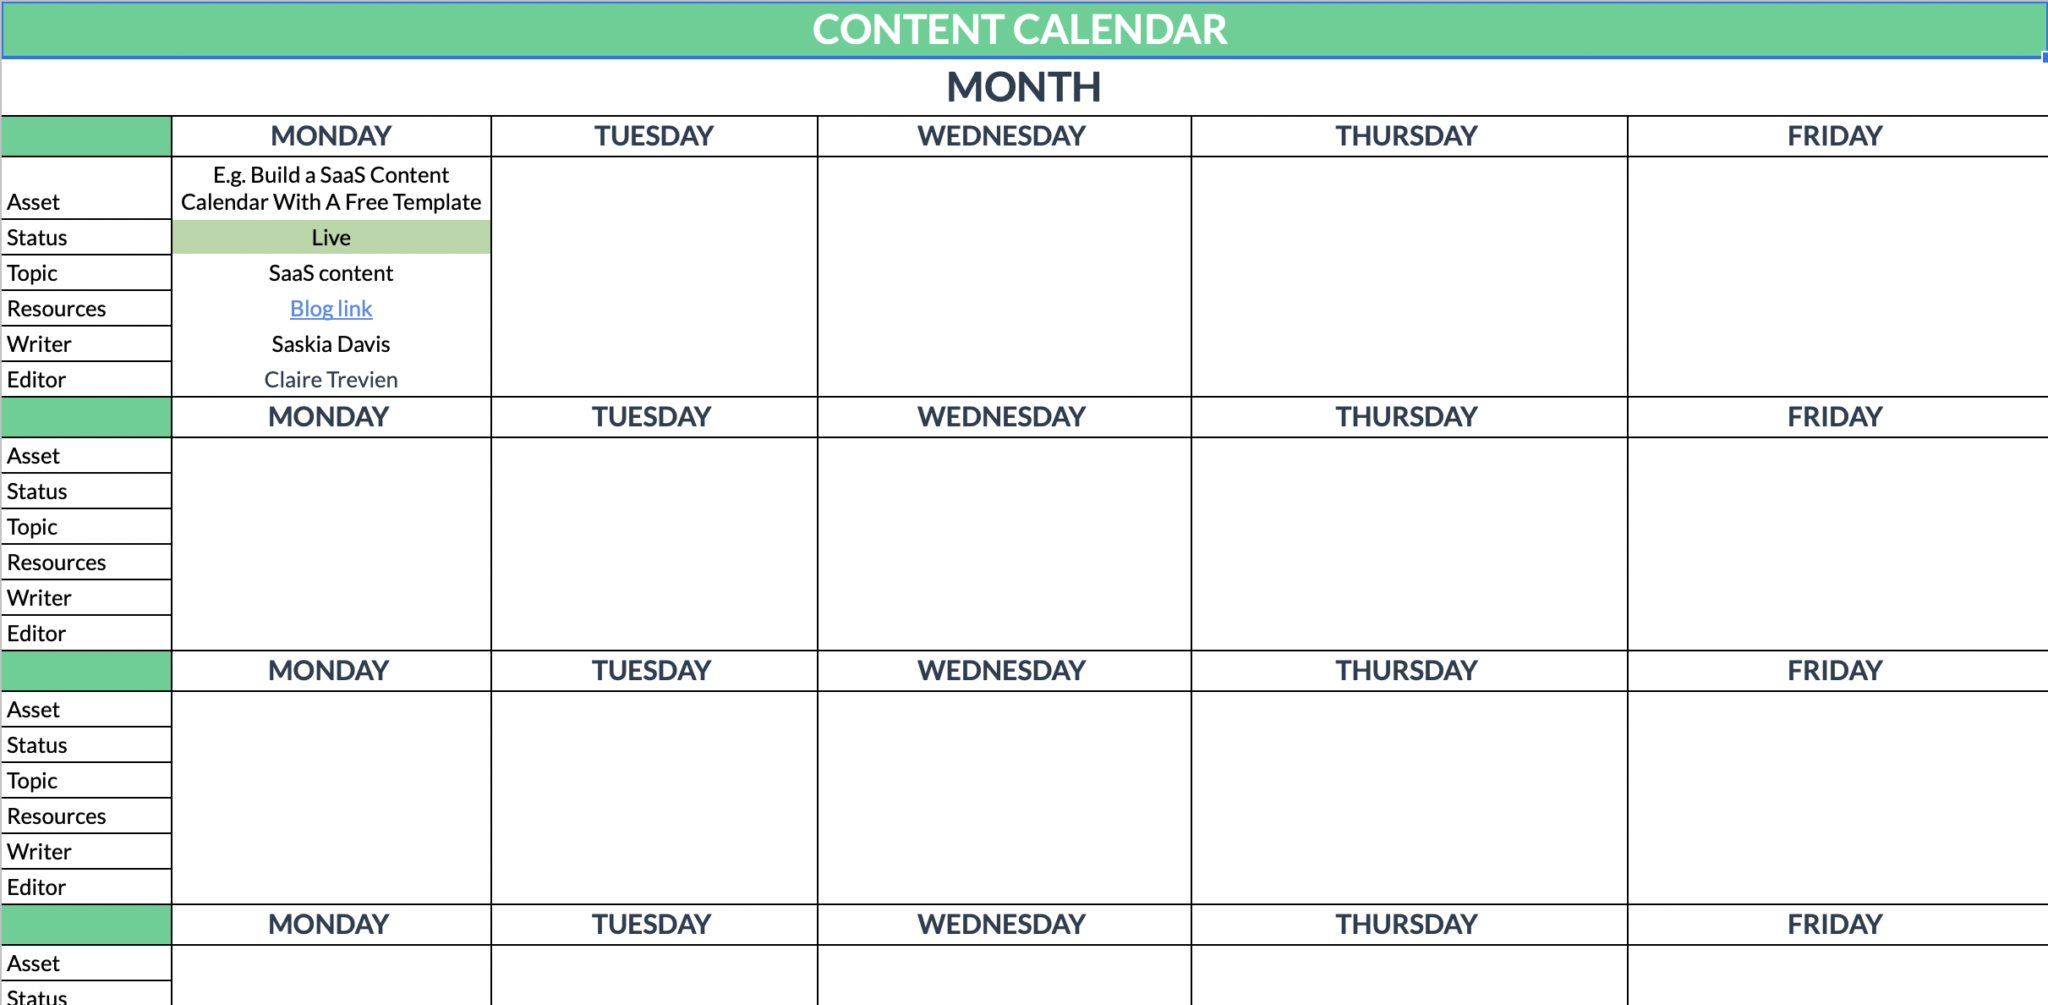 Build a SaaS Content Calendar With A Free Template - Isoline Communications